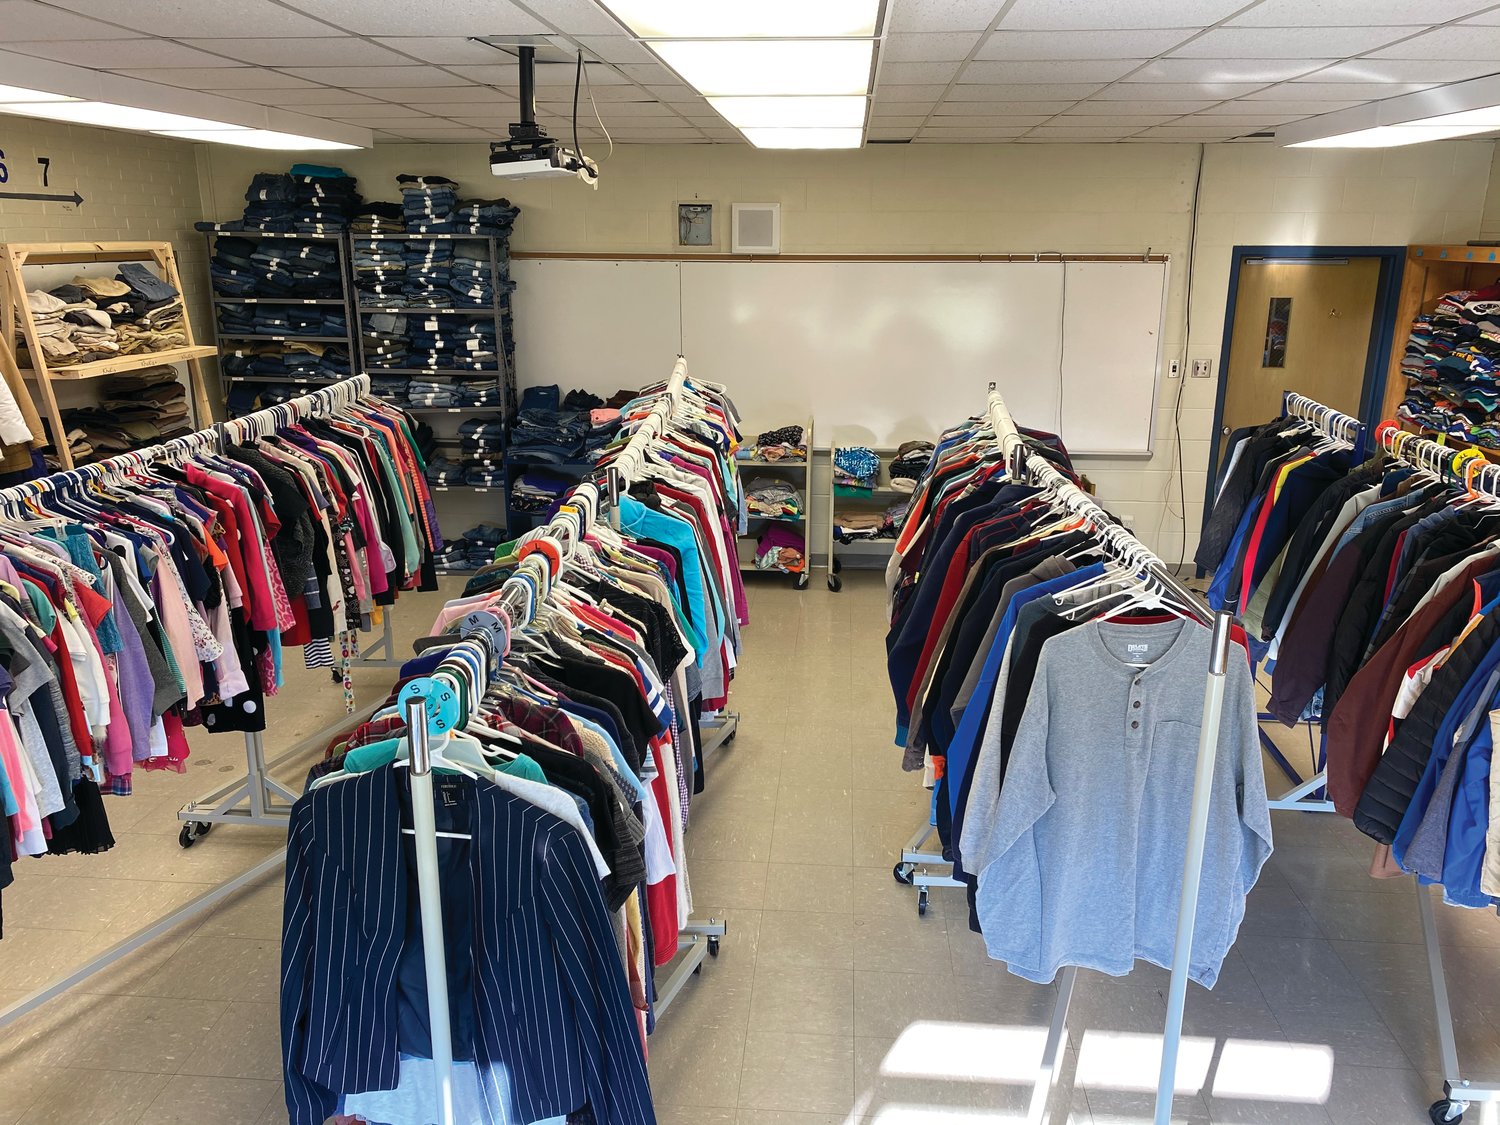 The Mustang Mall has an assortment of clothes and hygiene products for students in need.